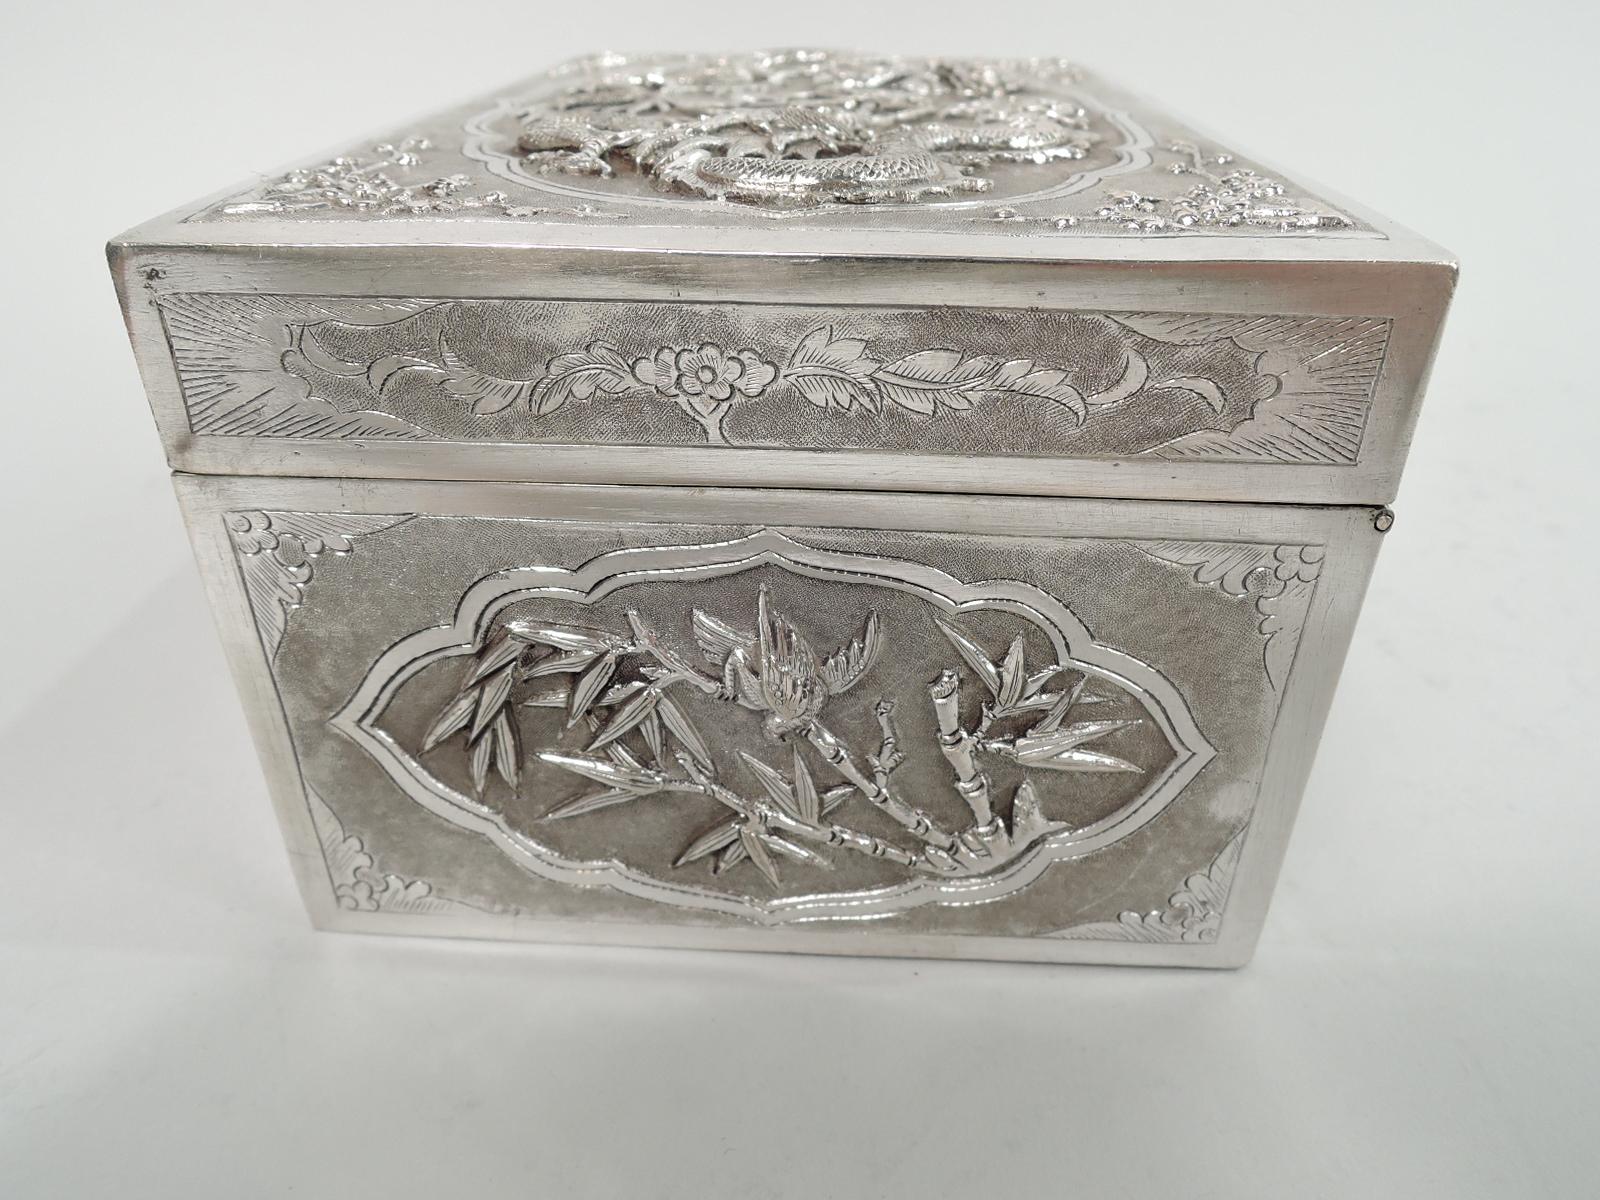 19th Century Antique Vietnamese Silver Treasure Box with Guardian Dragons For Sale